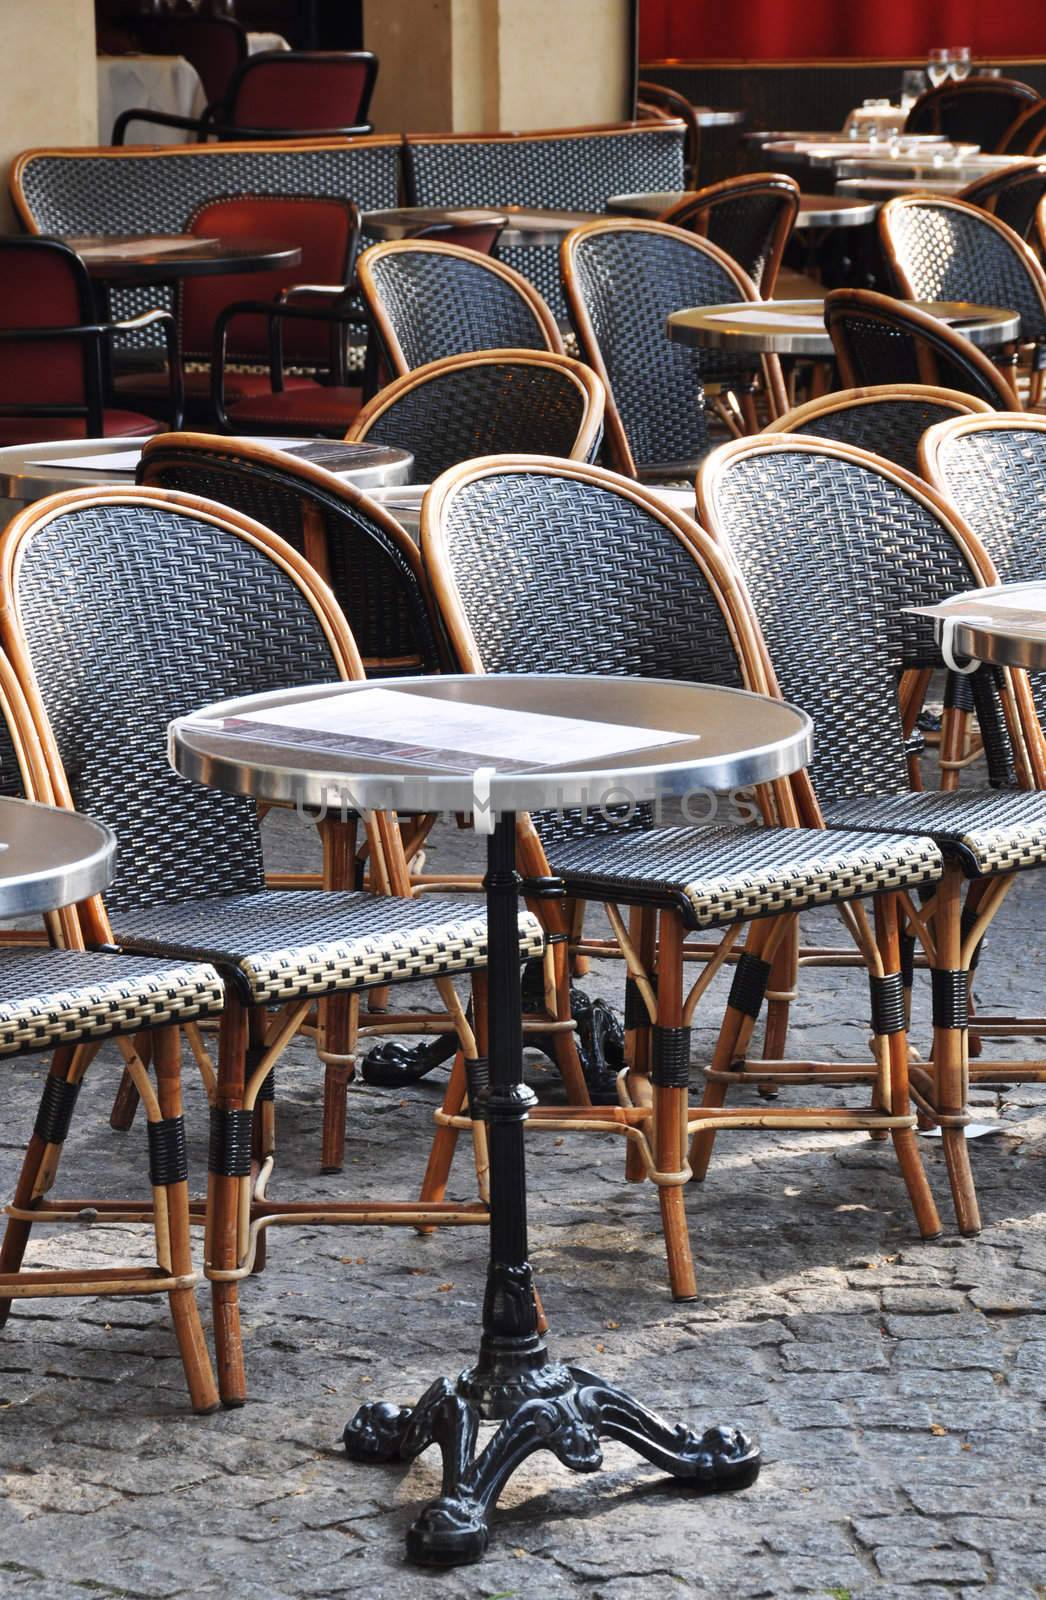 Traditional cafe terrace in Paris